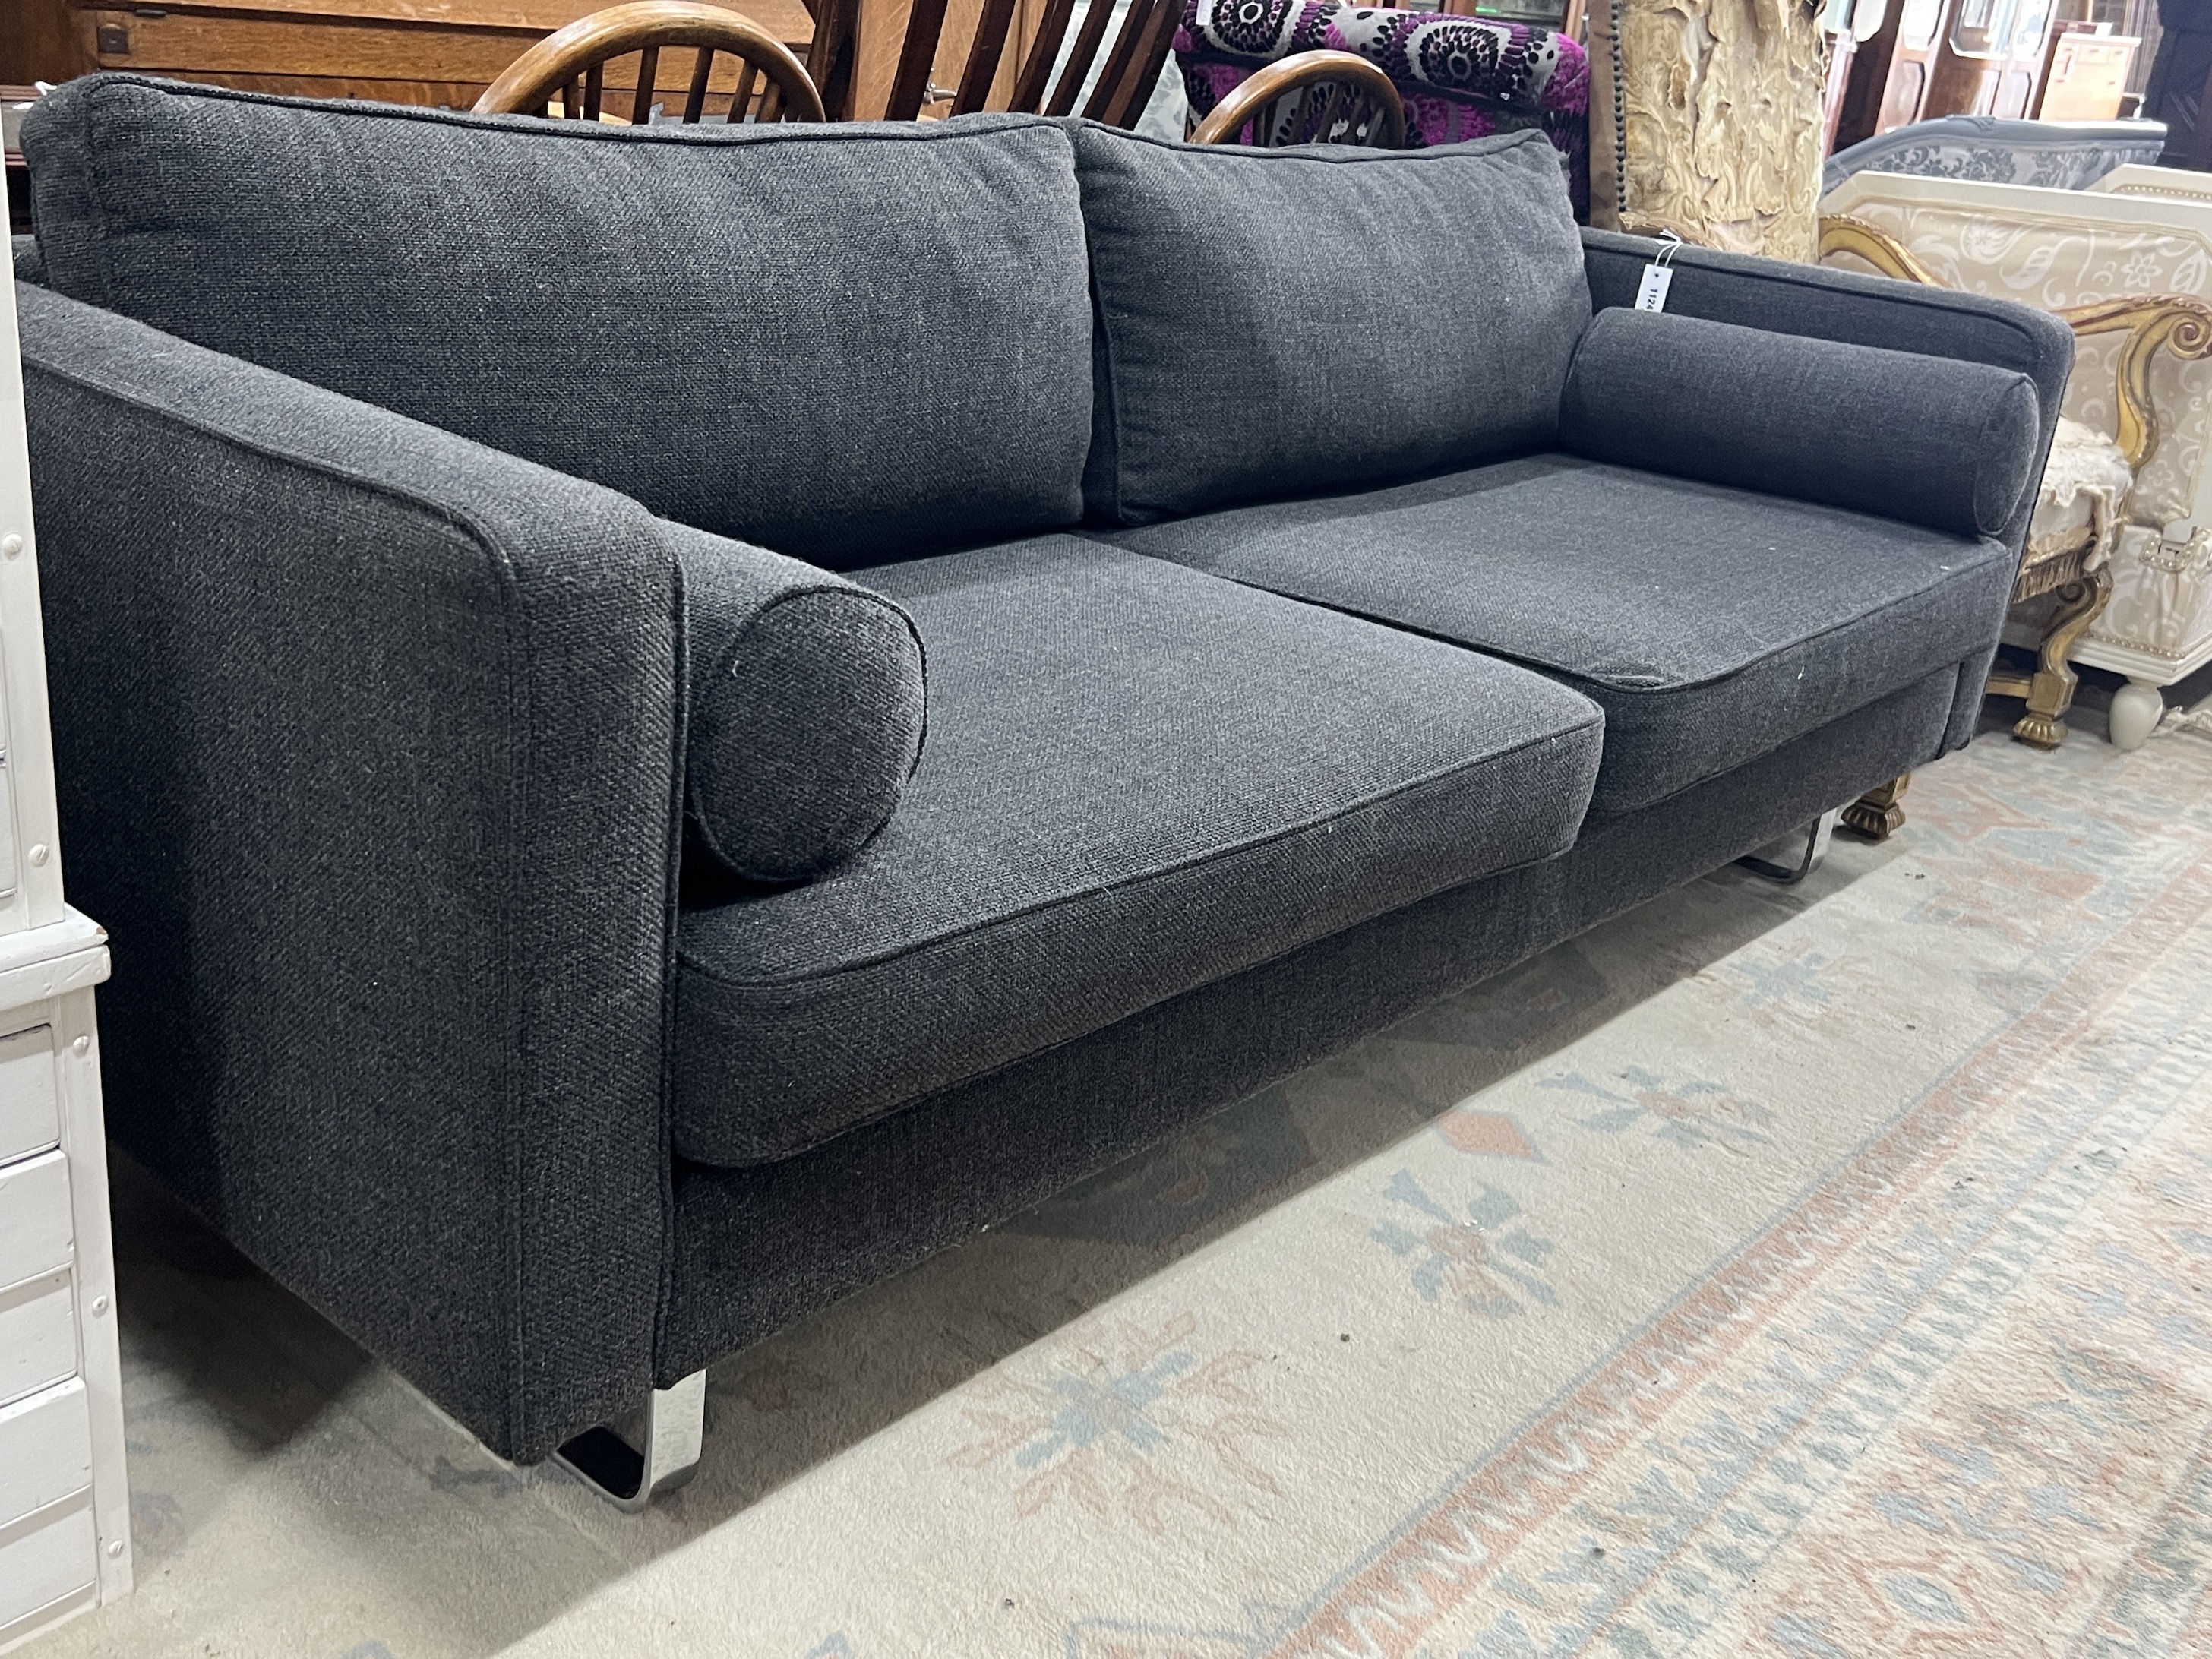 A Terence Conran 'Content' sofa, length 202cm, width 81cm, height 76cm